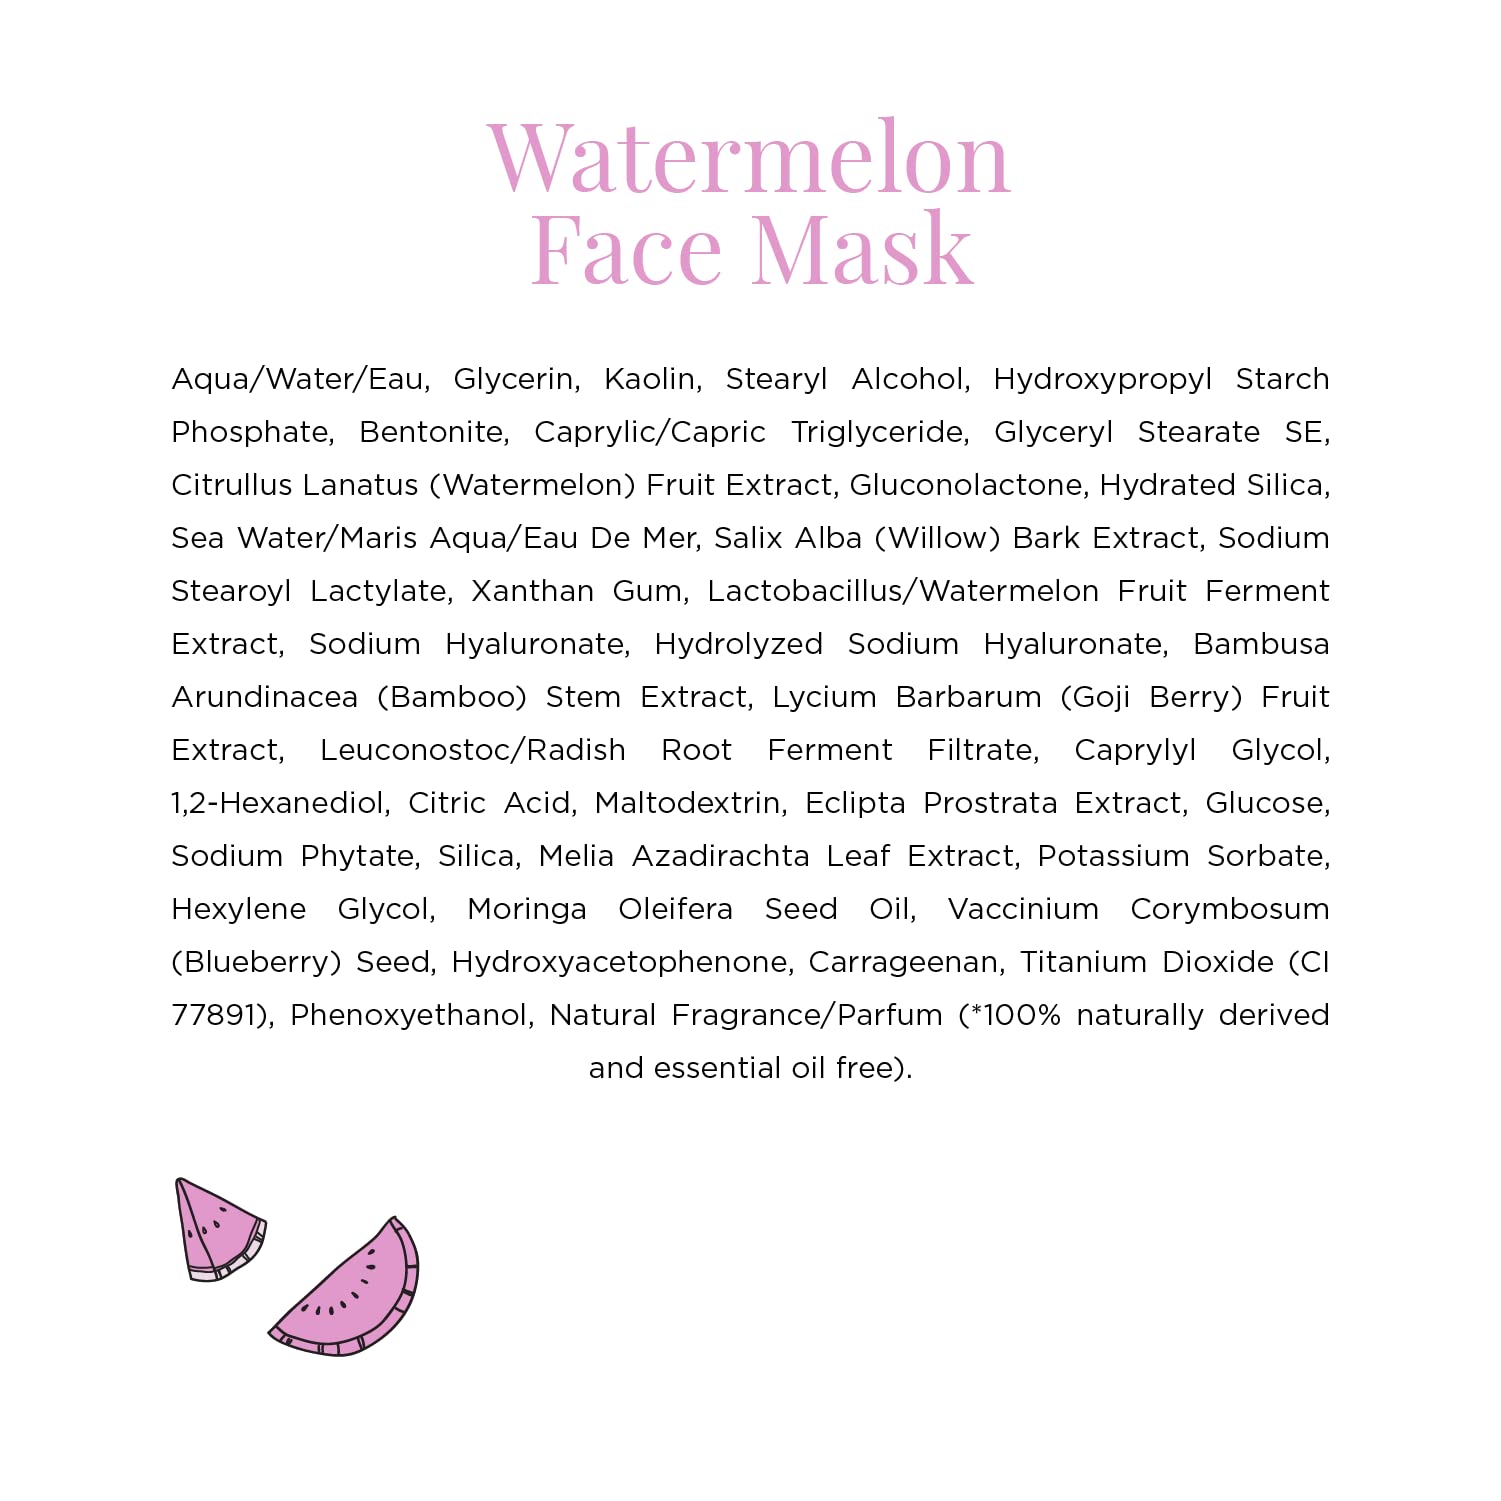 Glow Recipe Watermelon Glow Hyaluronic Clay Pore-Tight Facial - Gentle Exfoliating Clay Face Mask with Hyaluronic Acid - Help Minimize the Appearance of Pores, Even Tone + Hydrate (60ml)